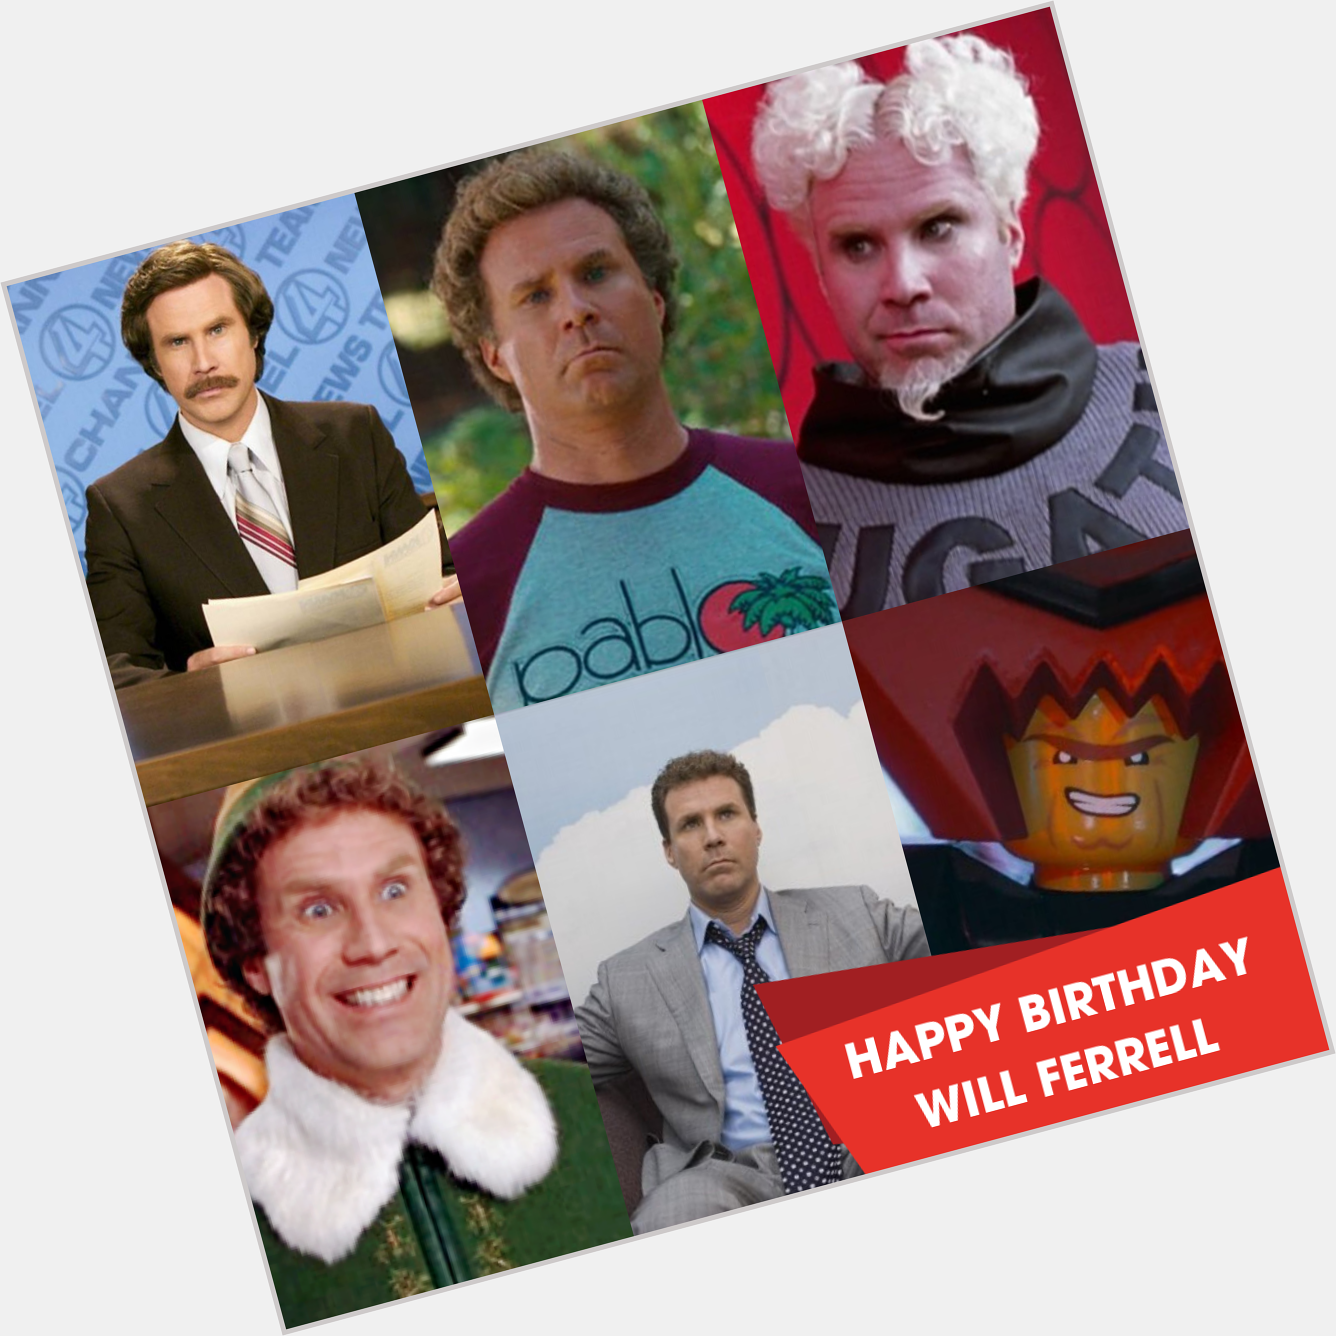 He\s kind of a big deal! Happy 53rd birthday Will Ferrell. What\s your favourite film he\s starred in? 